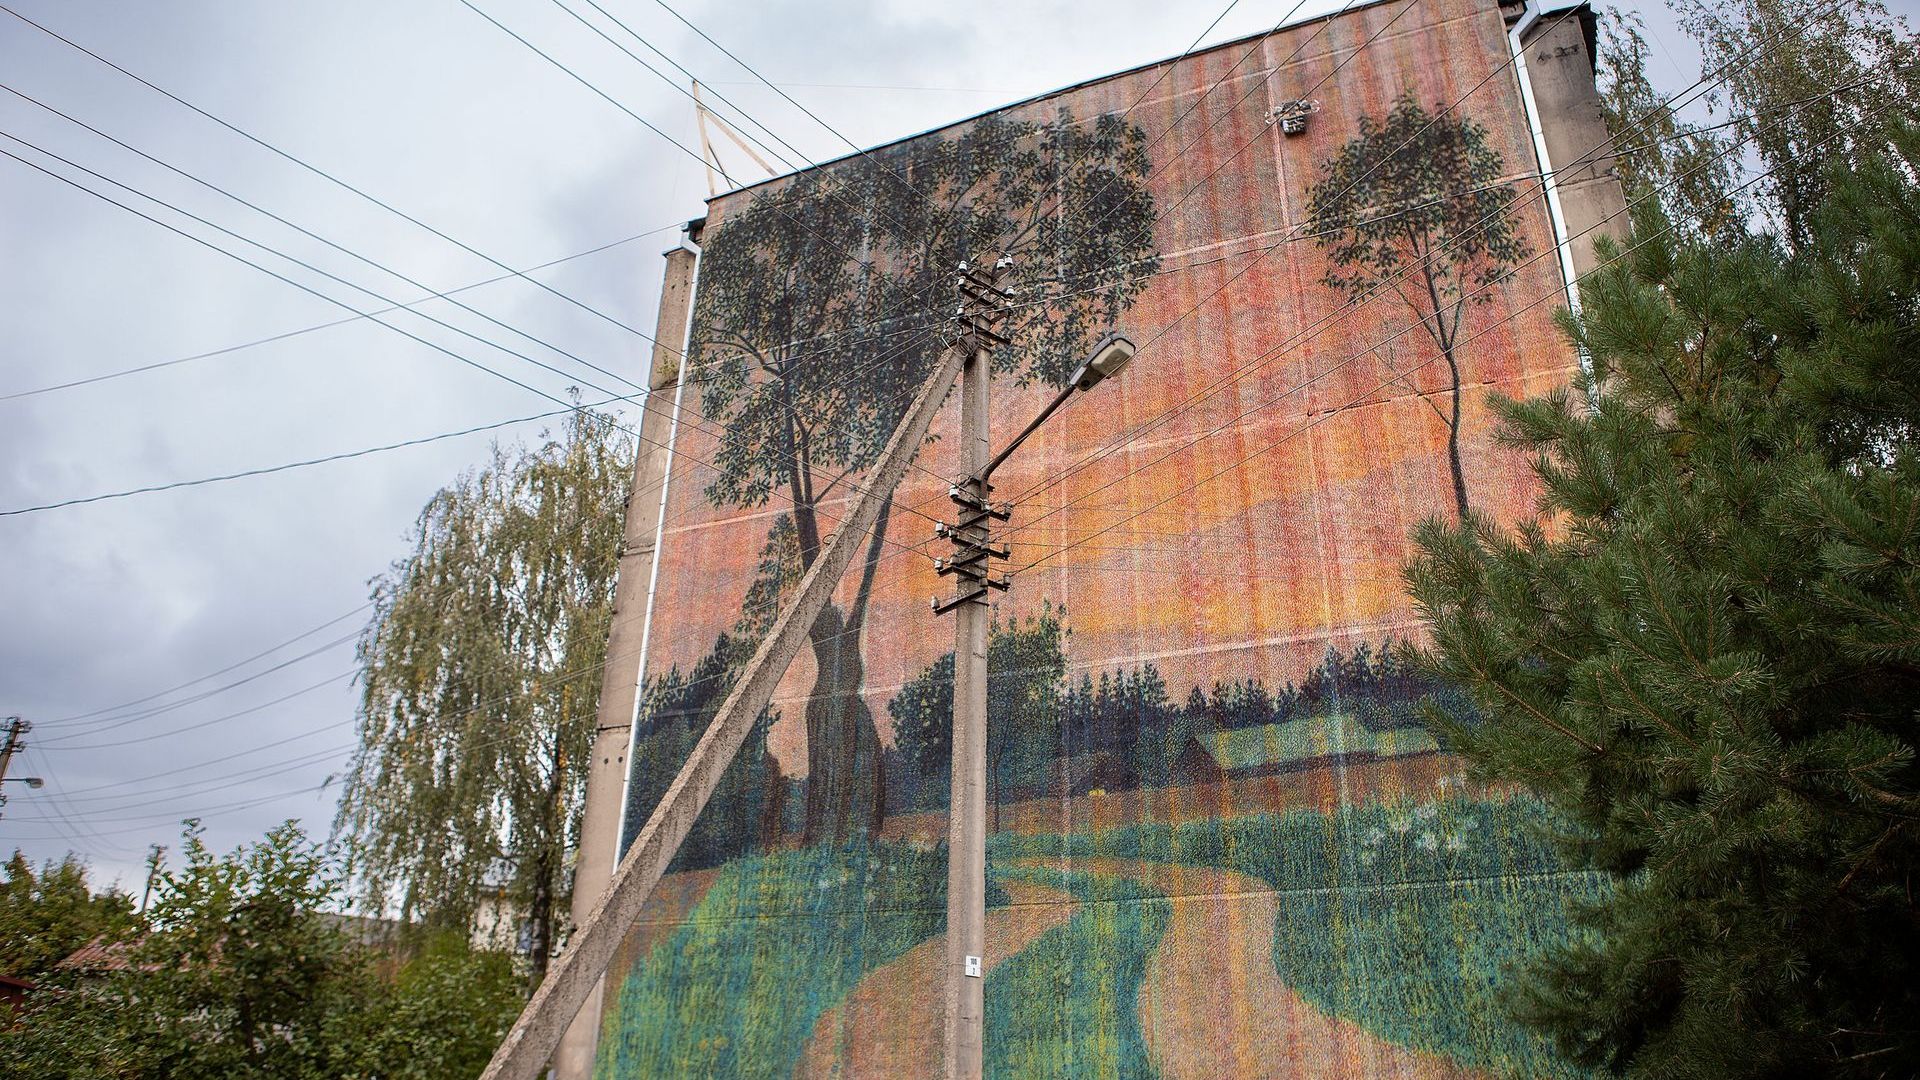 Mural In the evening